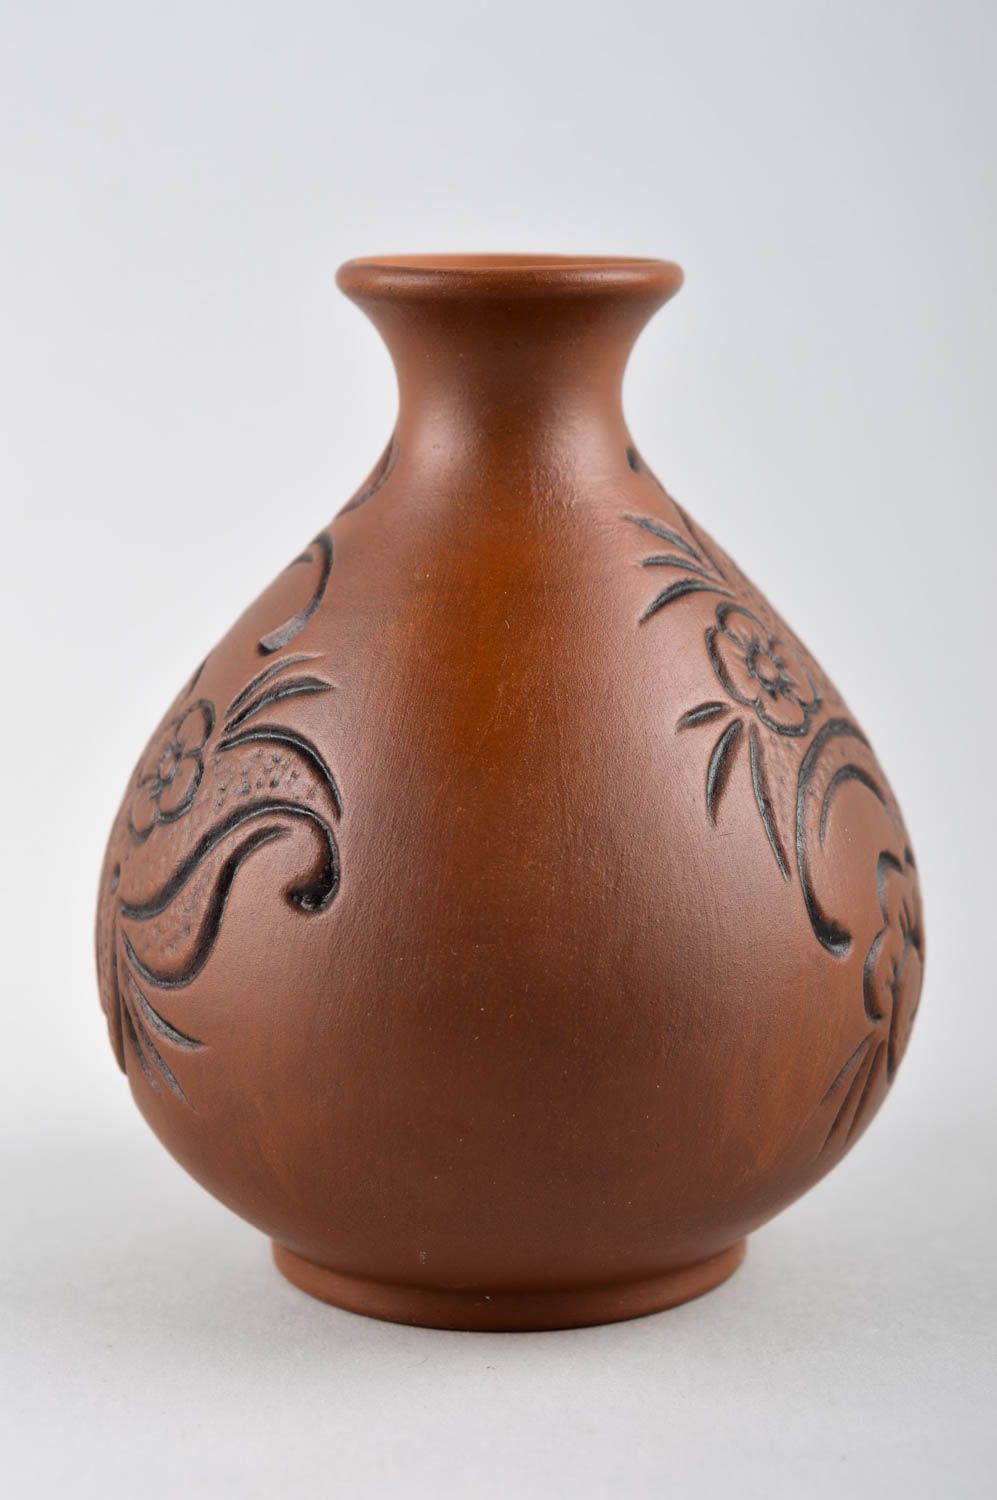 15 oz ceramic wine carafe with hand carvings in floral design 0,3 lb photo 3